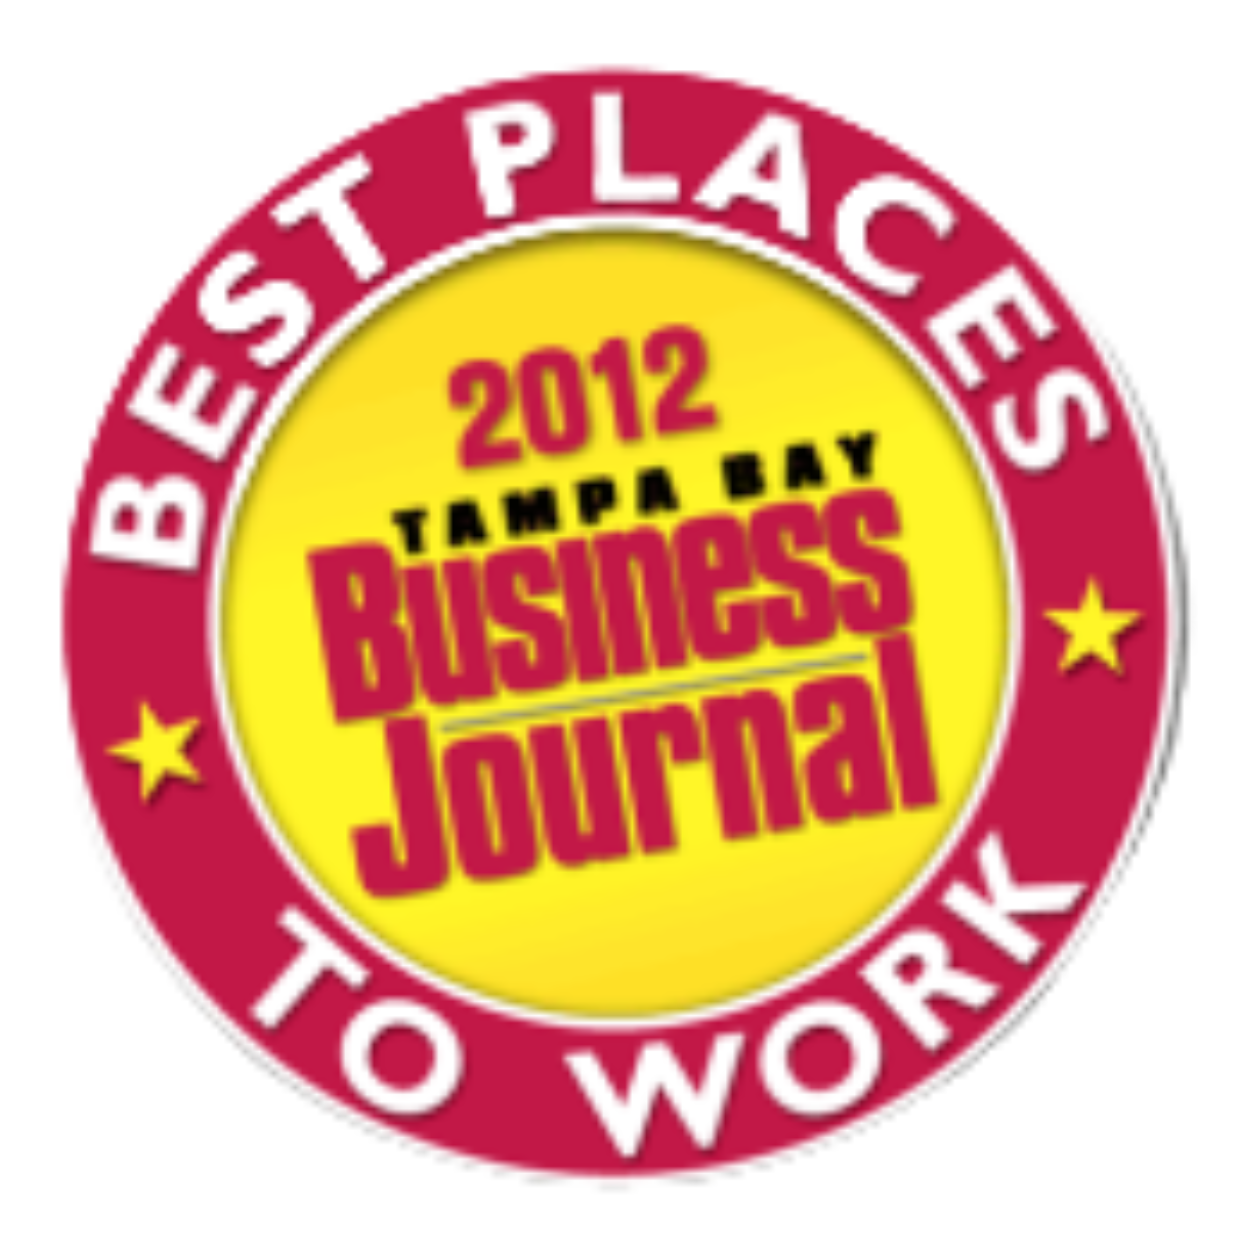 2012 best places to work